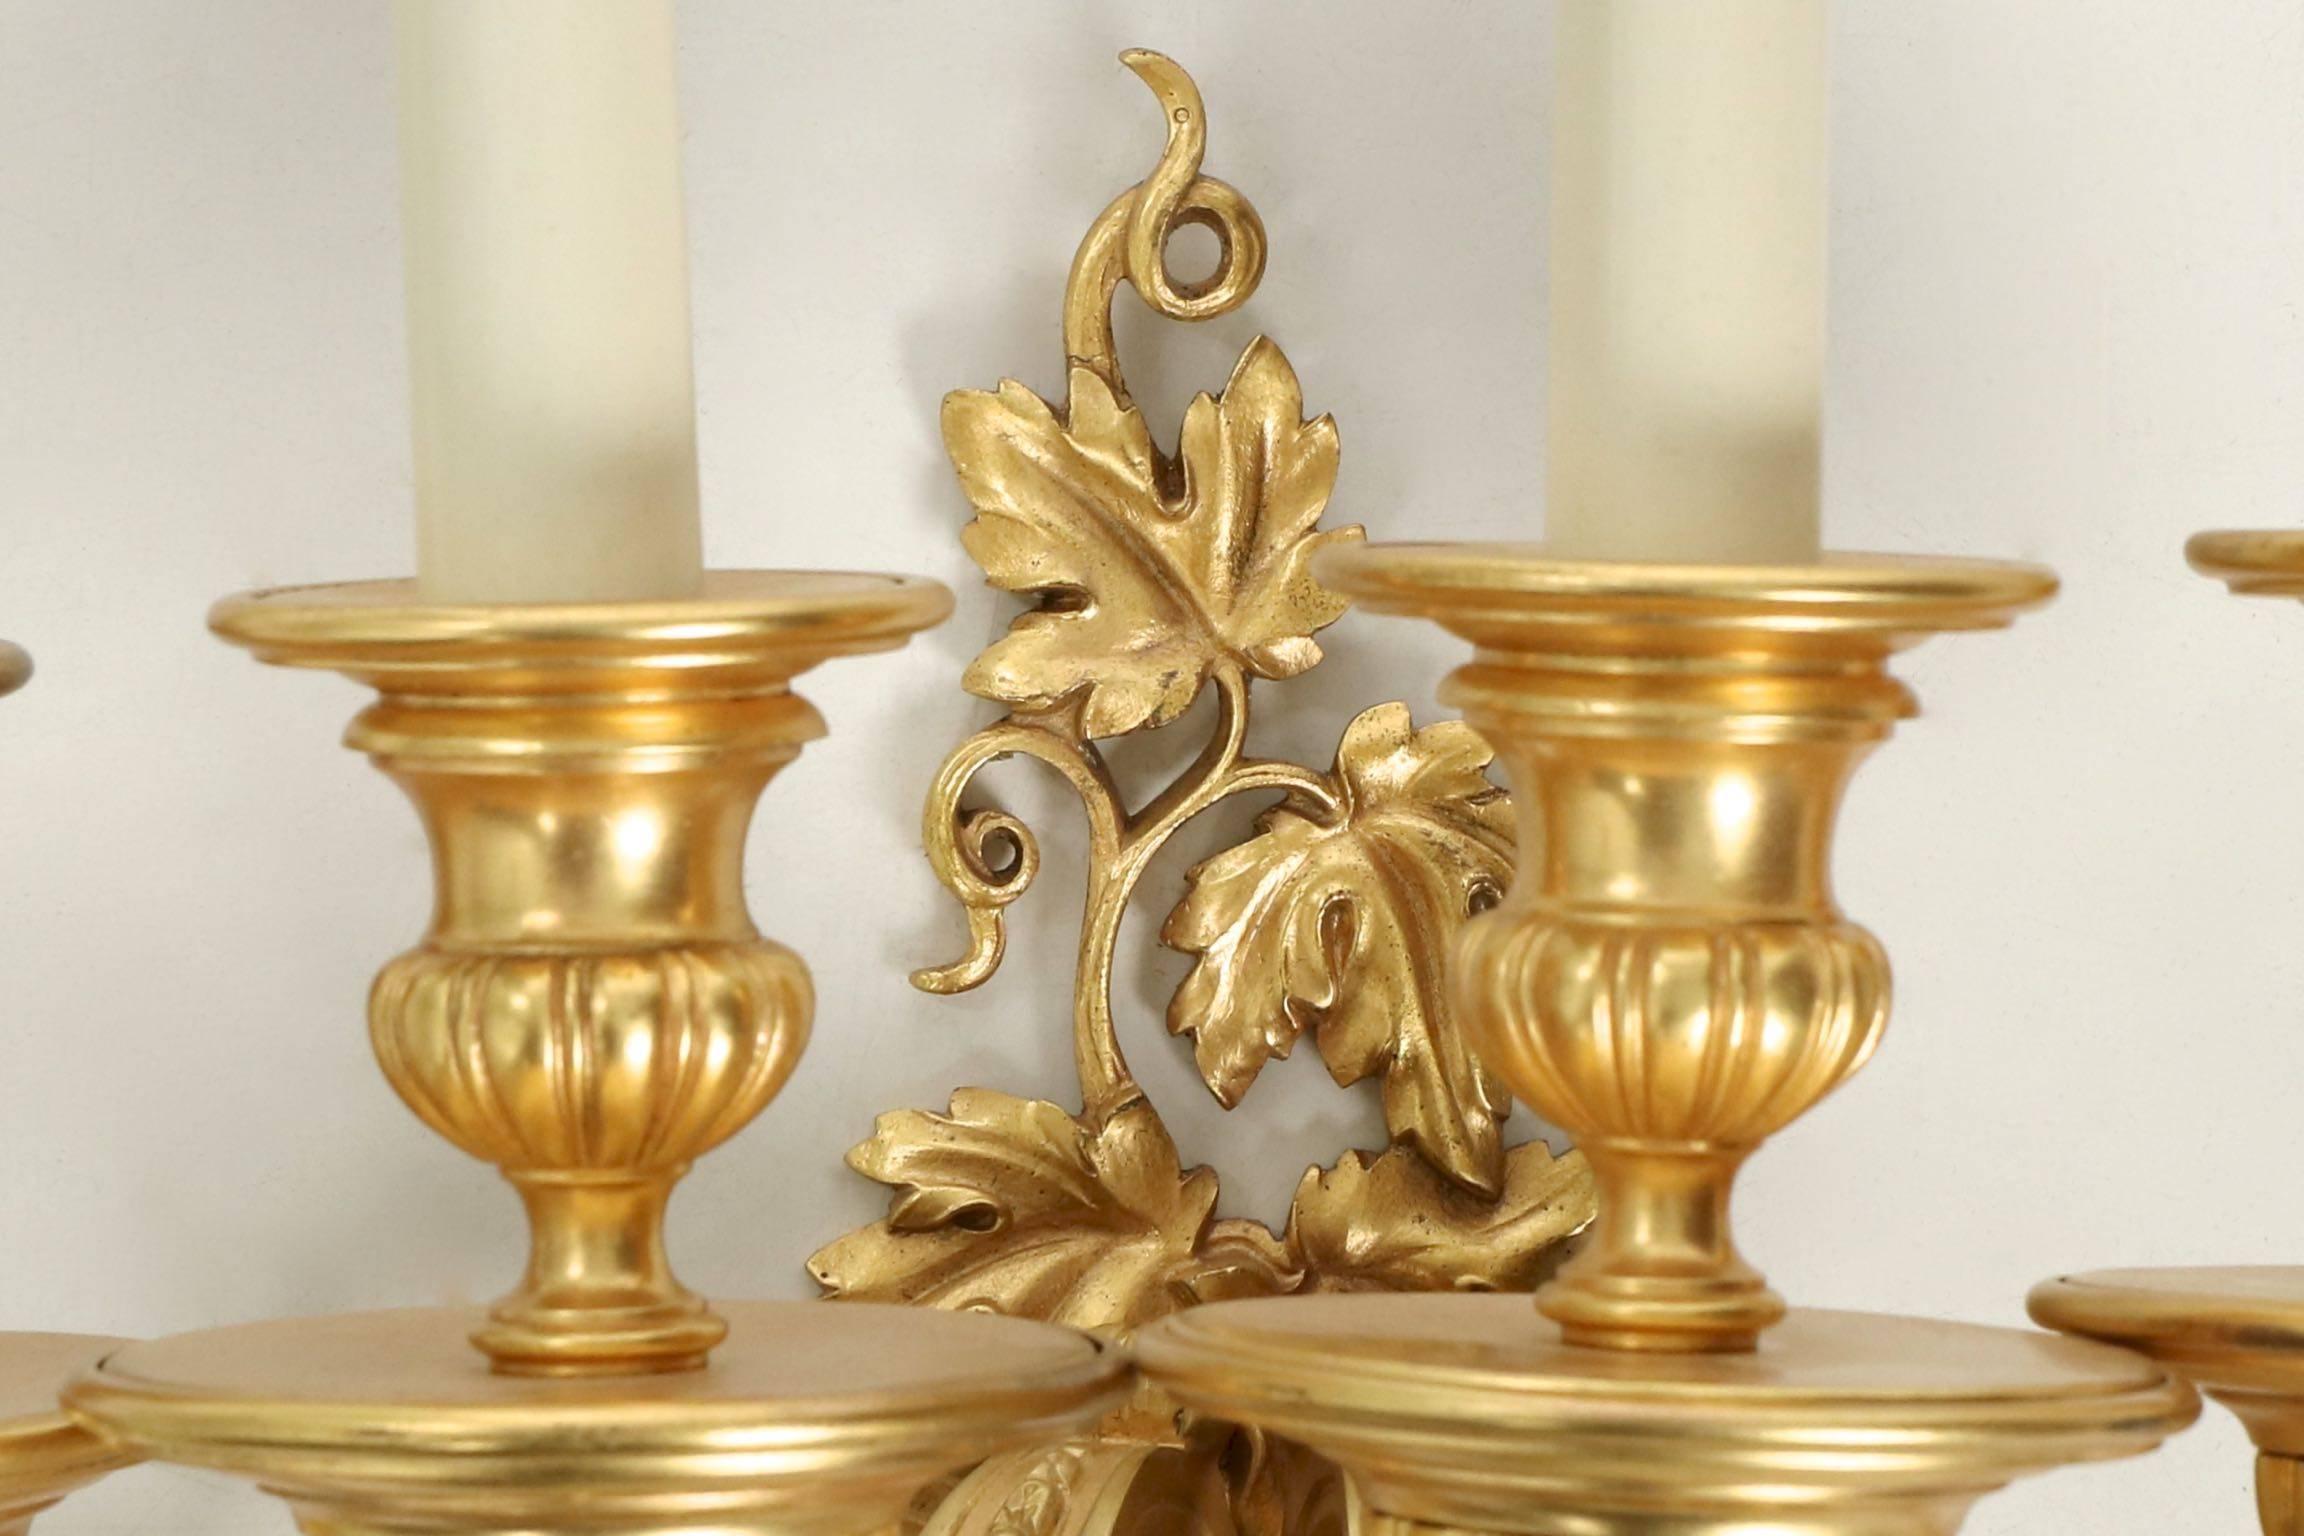 Empire Excellent Pair of Mitchell, Vance & Co Gilt Bronze Four-Light Wall Sconce Lamps